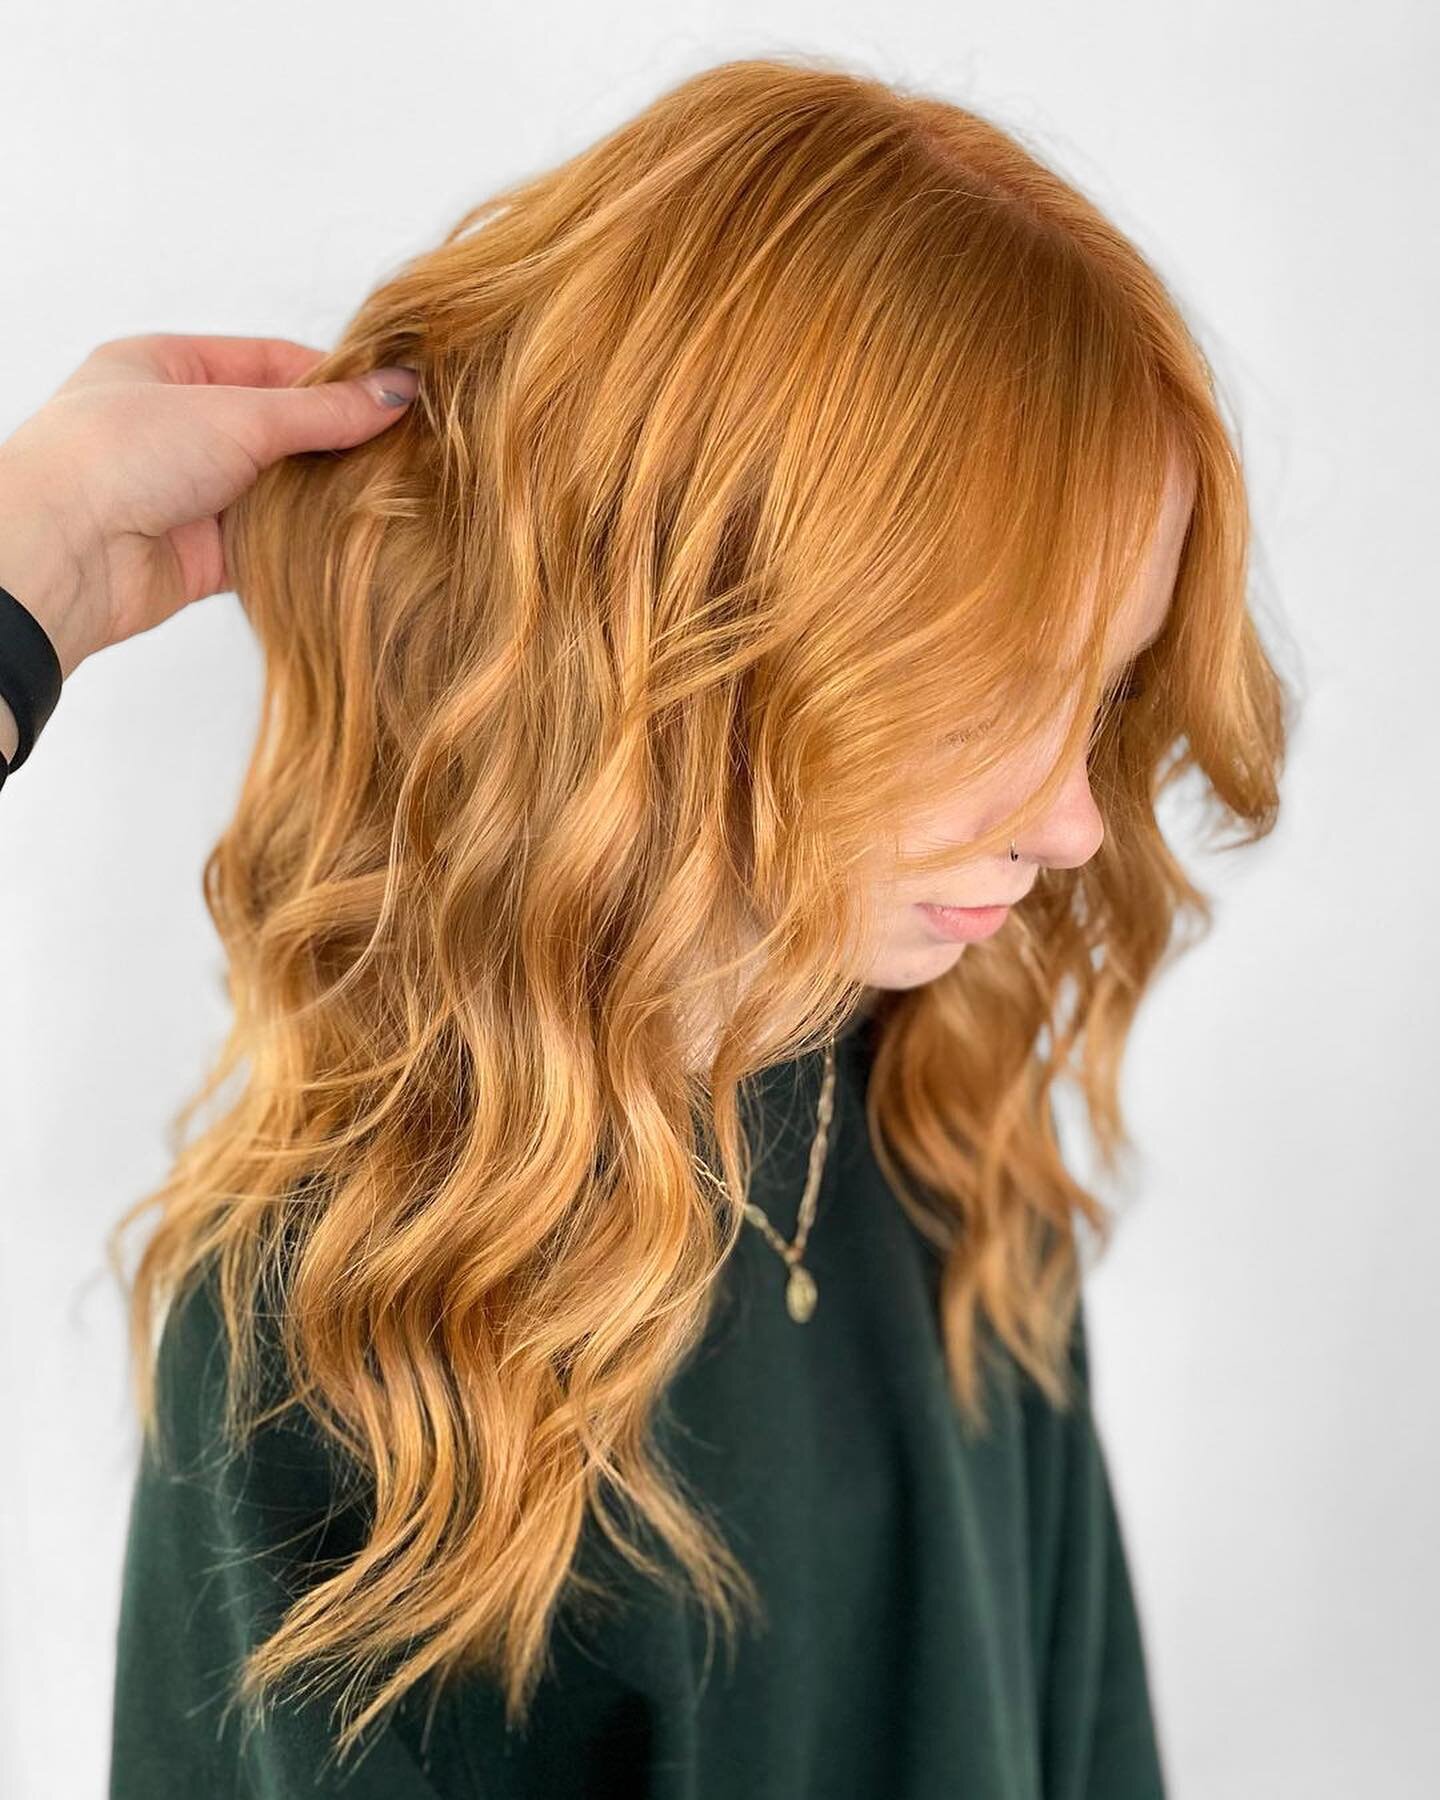 Copper is in season 🧡

Swipe &mdash;&gt; to see the before! 

Stylist @_hairby.kenzie 

&bull;
&bull;

#copperhair #copperhaircolor #copperhairgoals #copperhairdontcare #yychair #yychairstylist #yychairsalon #yycsalon #yycliving #yyclifestyle #yylad